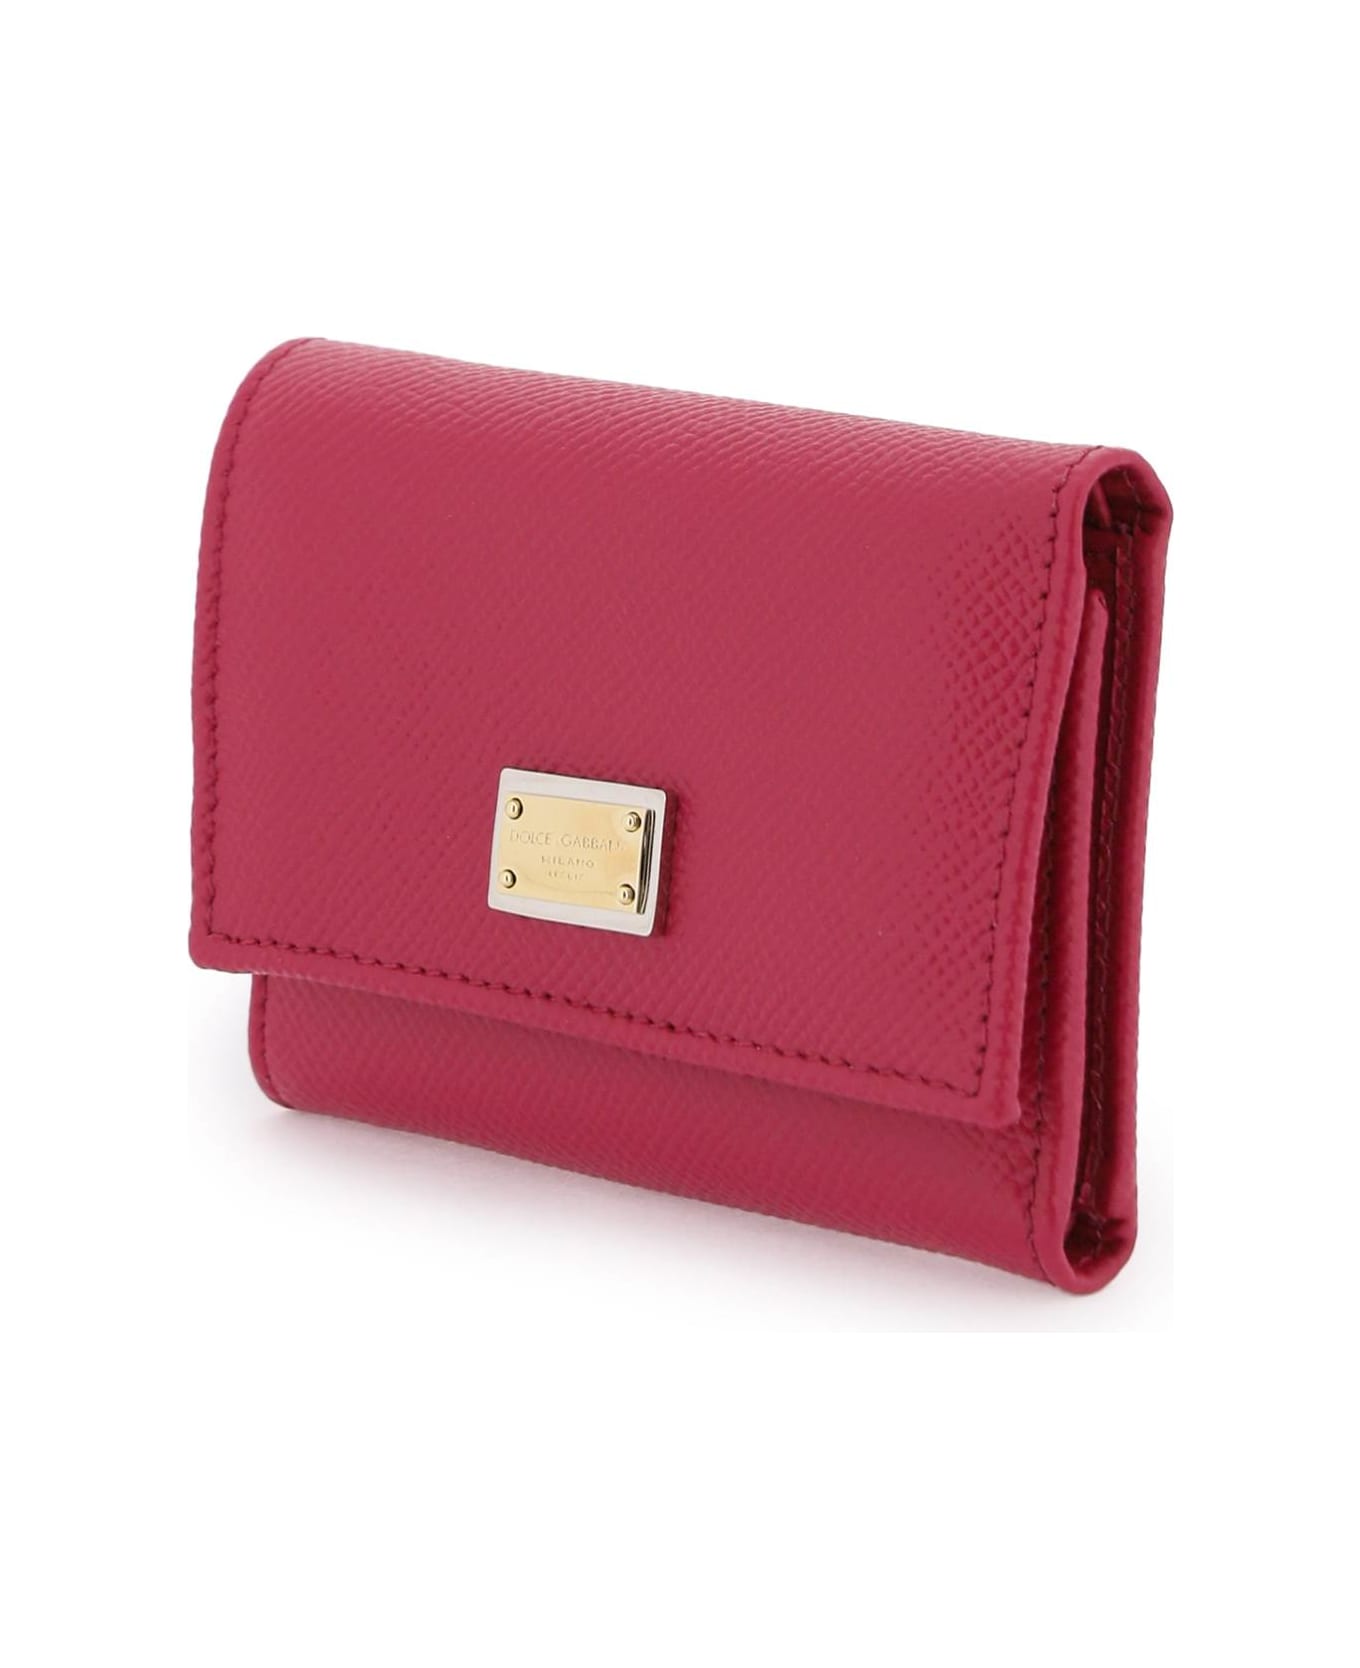 Dolce & Gabbana Leather Wallet - Pink 財布